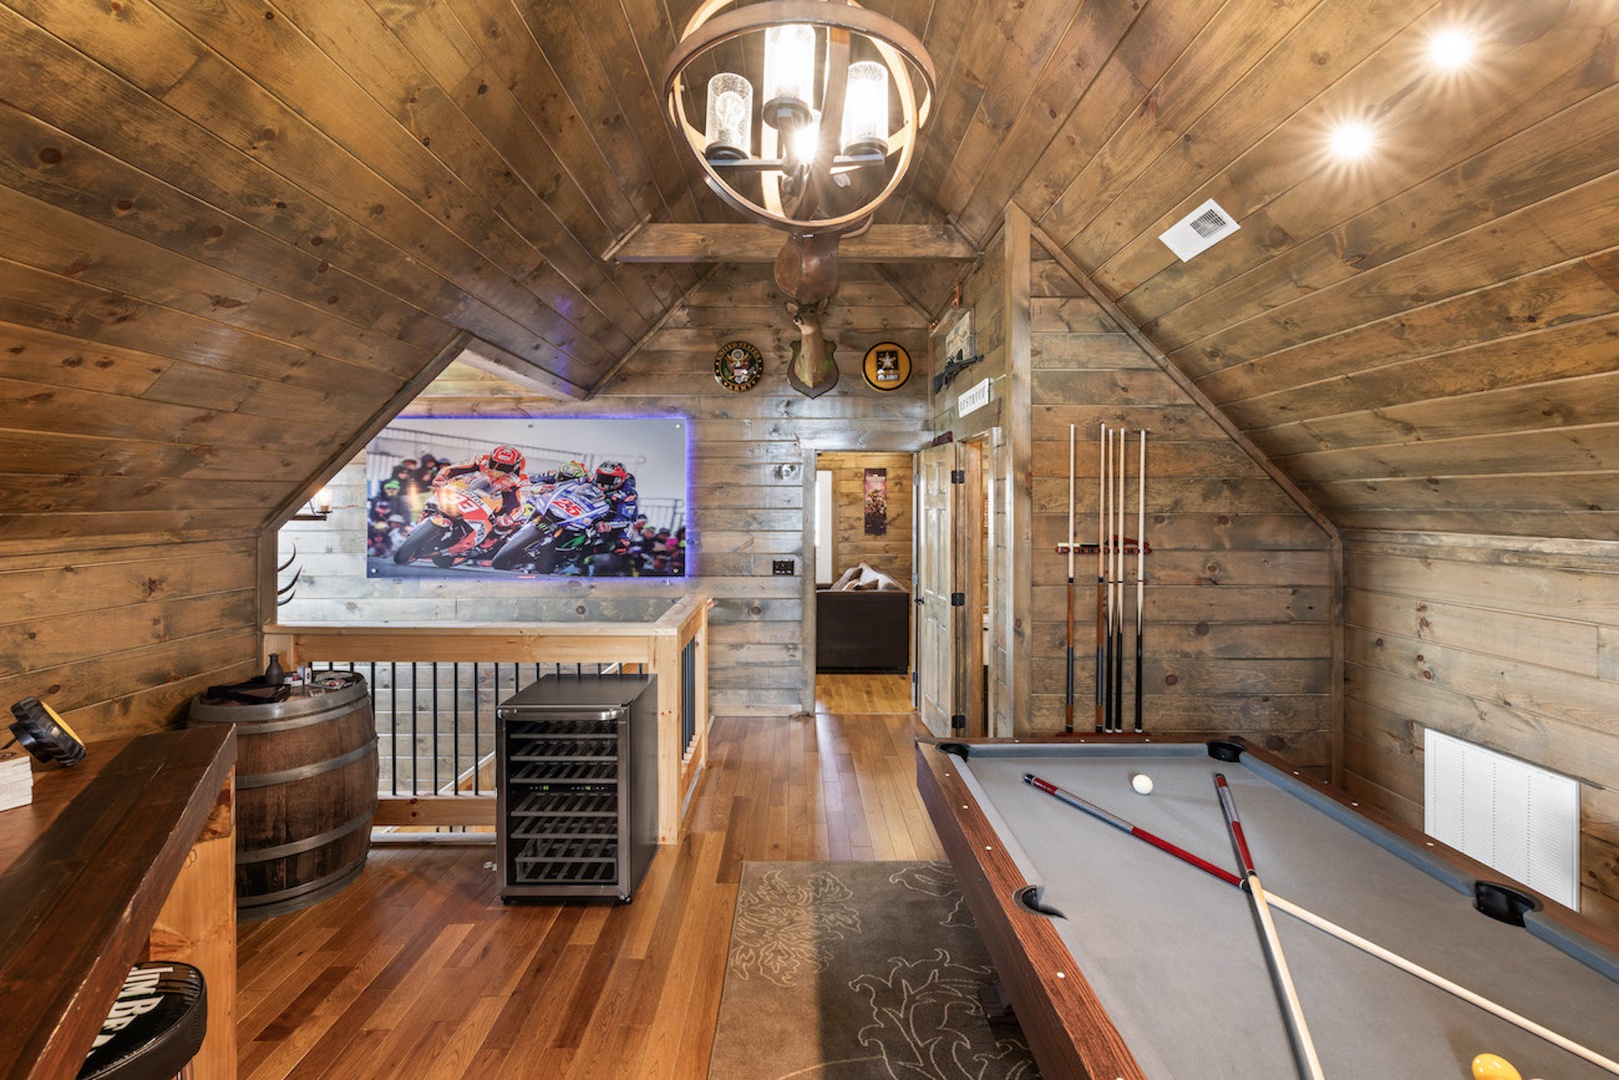 Enjoy a round of pool or relax at the bar with a cocktail in the upper-level loft